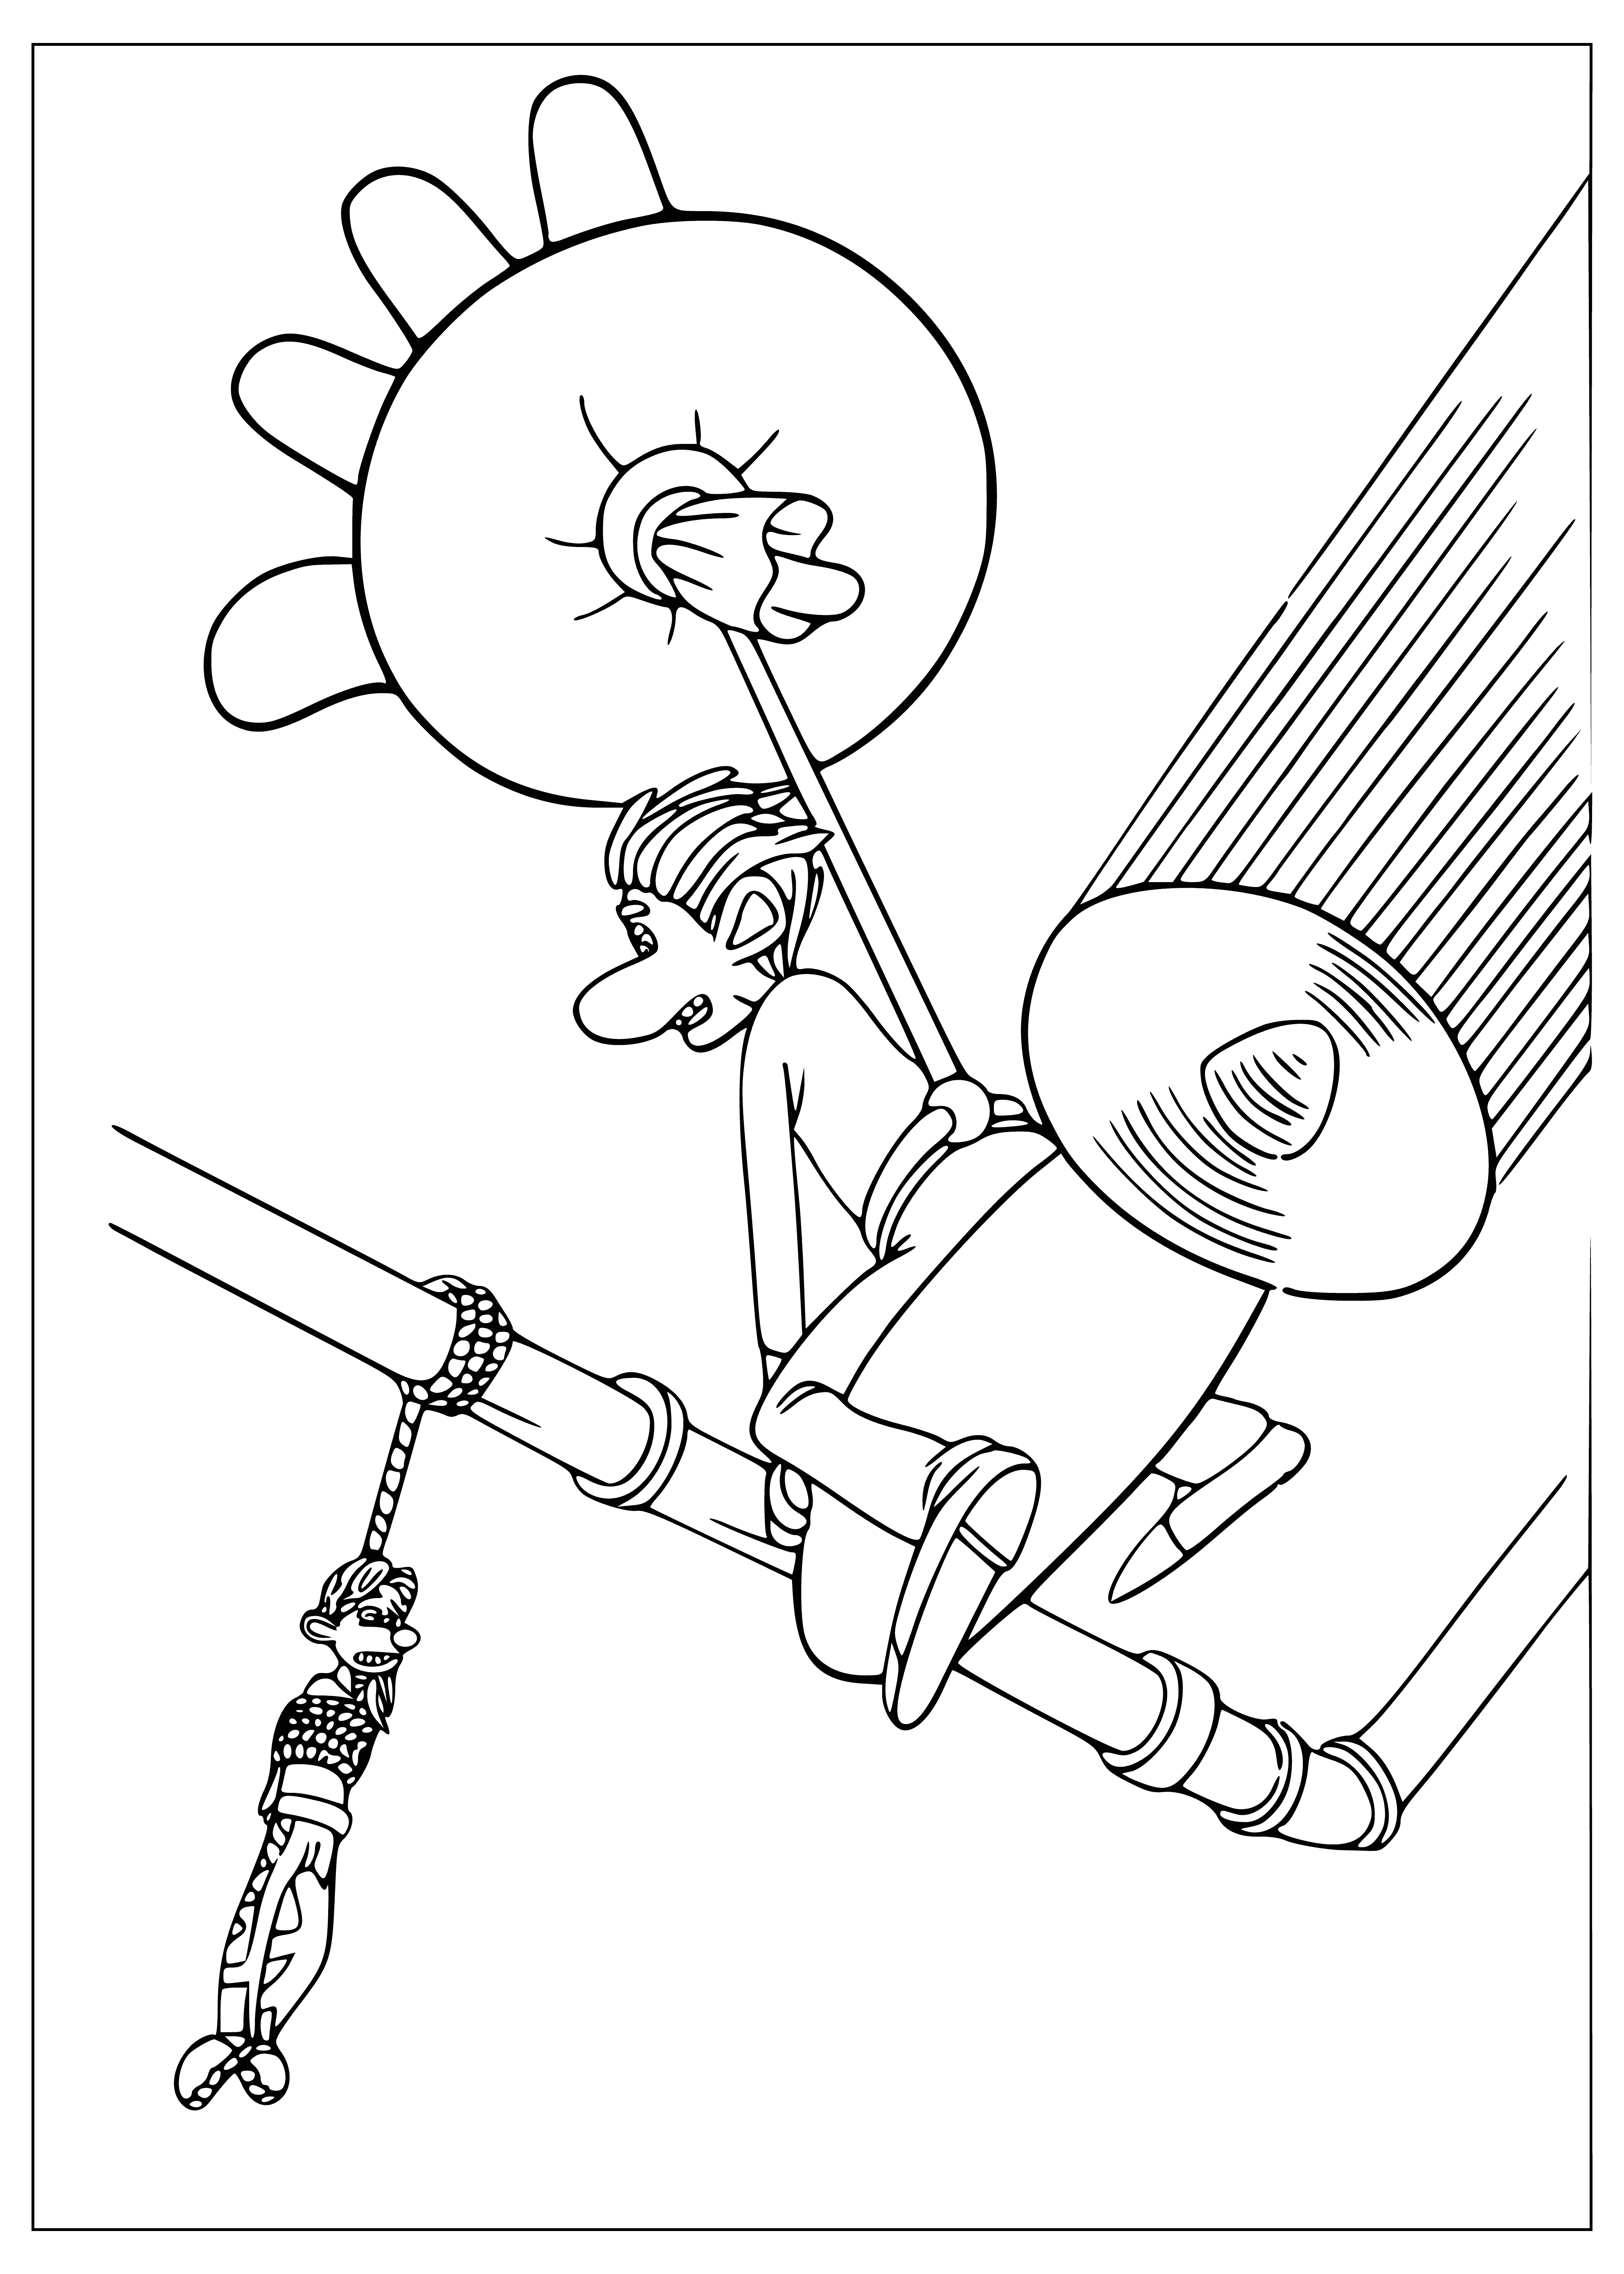 coloring page: Roddy is lifeguarding an alligator - standing on its head with a trident. #CrazyAnimals